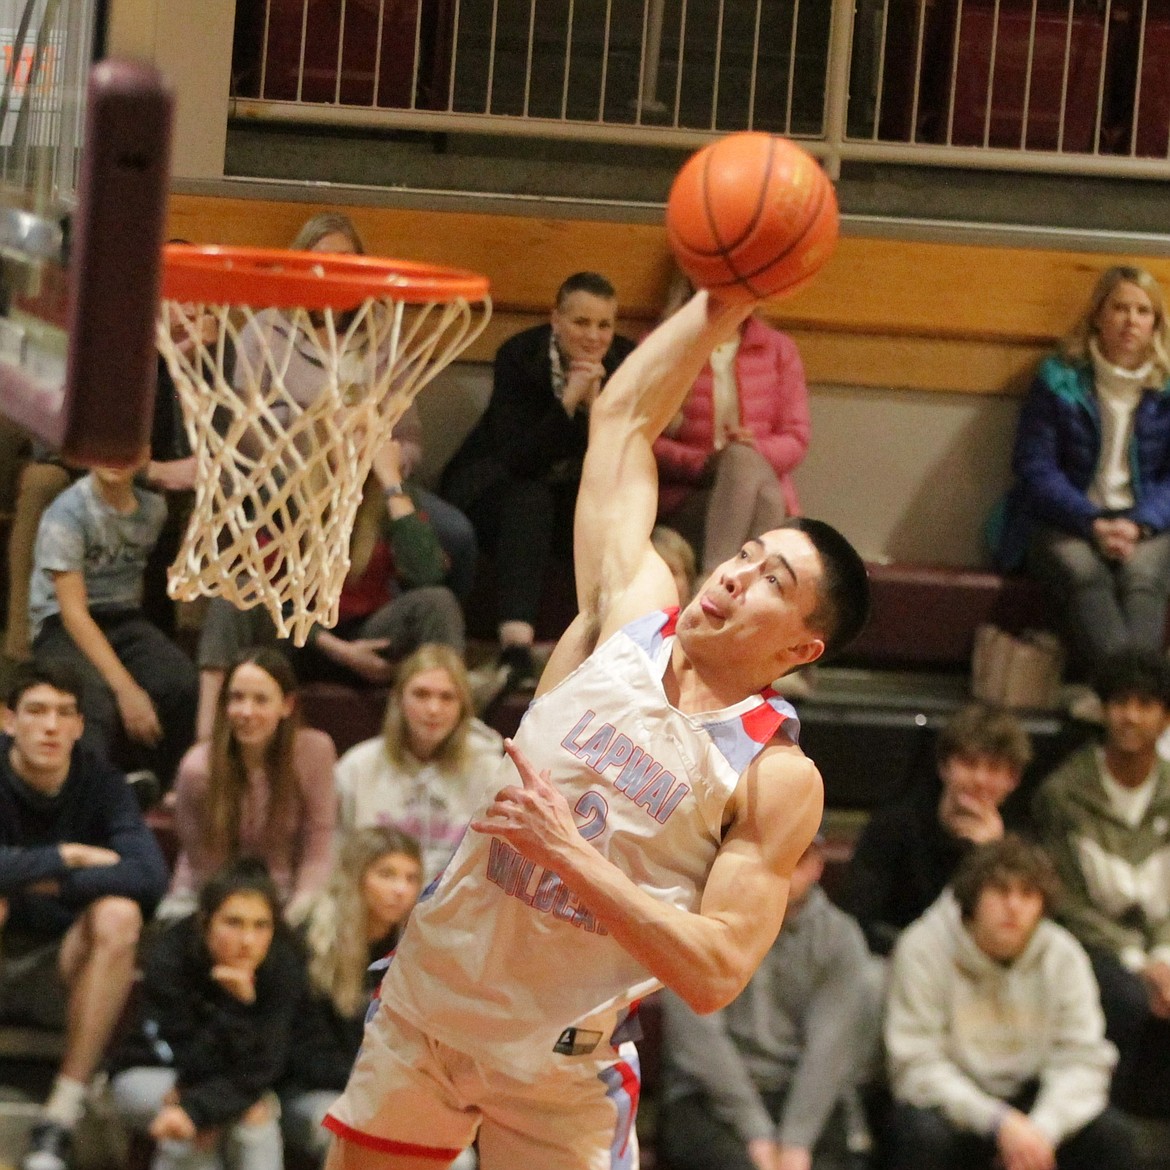 JASON ELLIOTT/Press
Lapwai senior Titus Yearout attempts to throw down a dunk during the slam dunk contest in conjunction with the 19th annual Idaho All-Star Basketball Games at North Idaho College.